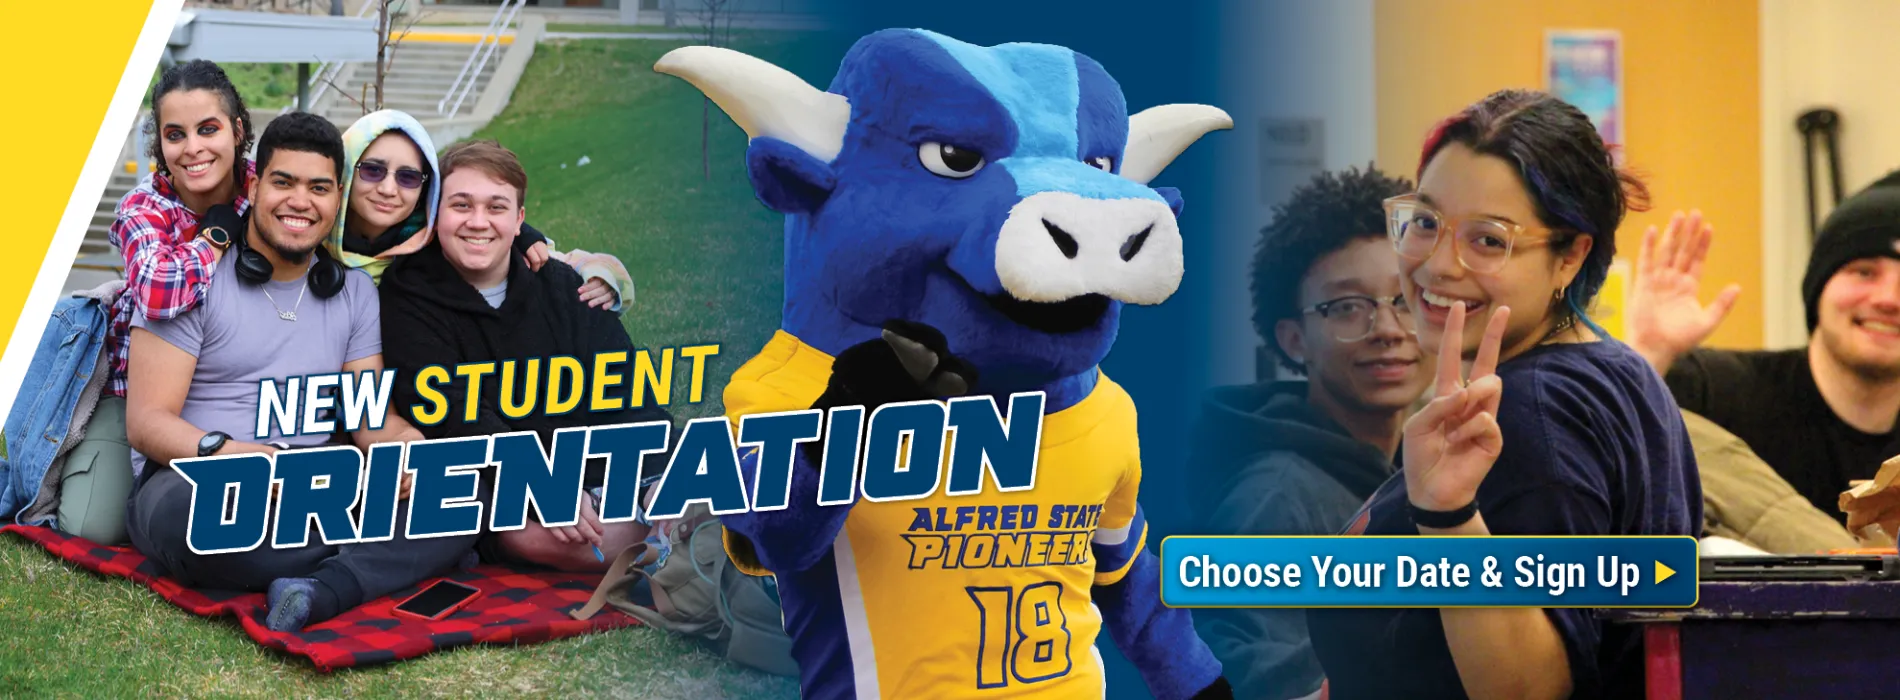 New Student Orientation. Choose your date & sign up. Image of smiling students and mascot Big Blue pinting. 